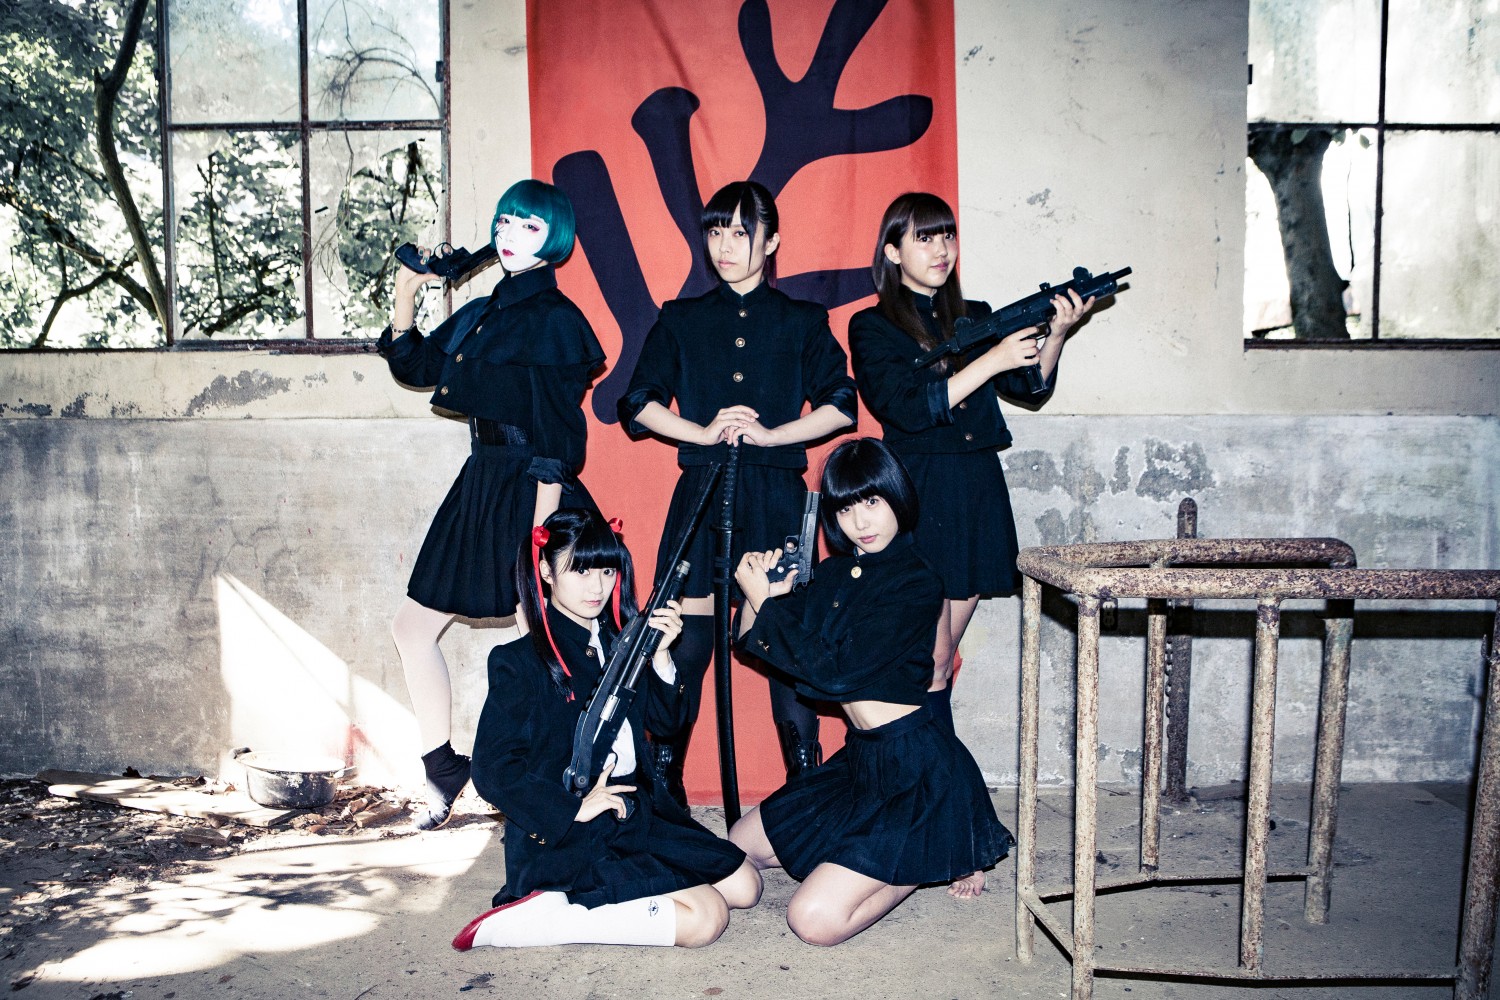 Ultradark and Eclectic Idol Unit NECRONOMIDOL to Release EP “from chaos born”!